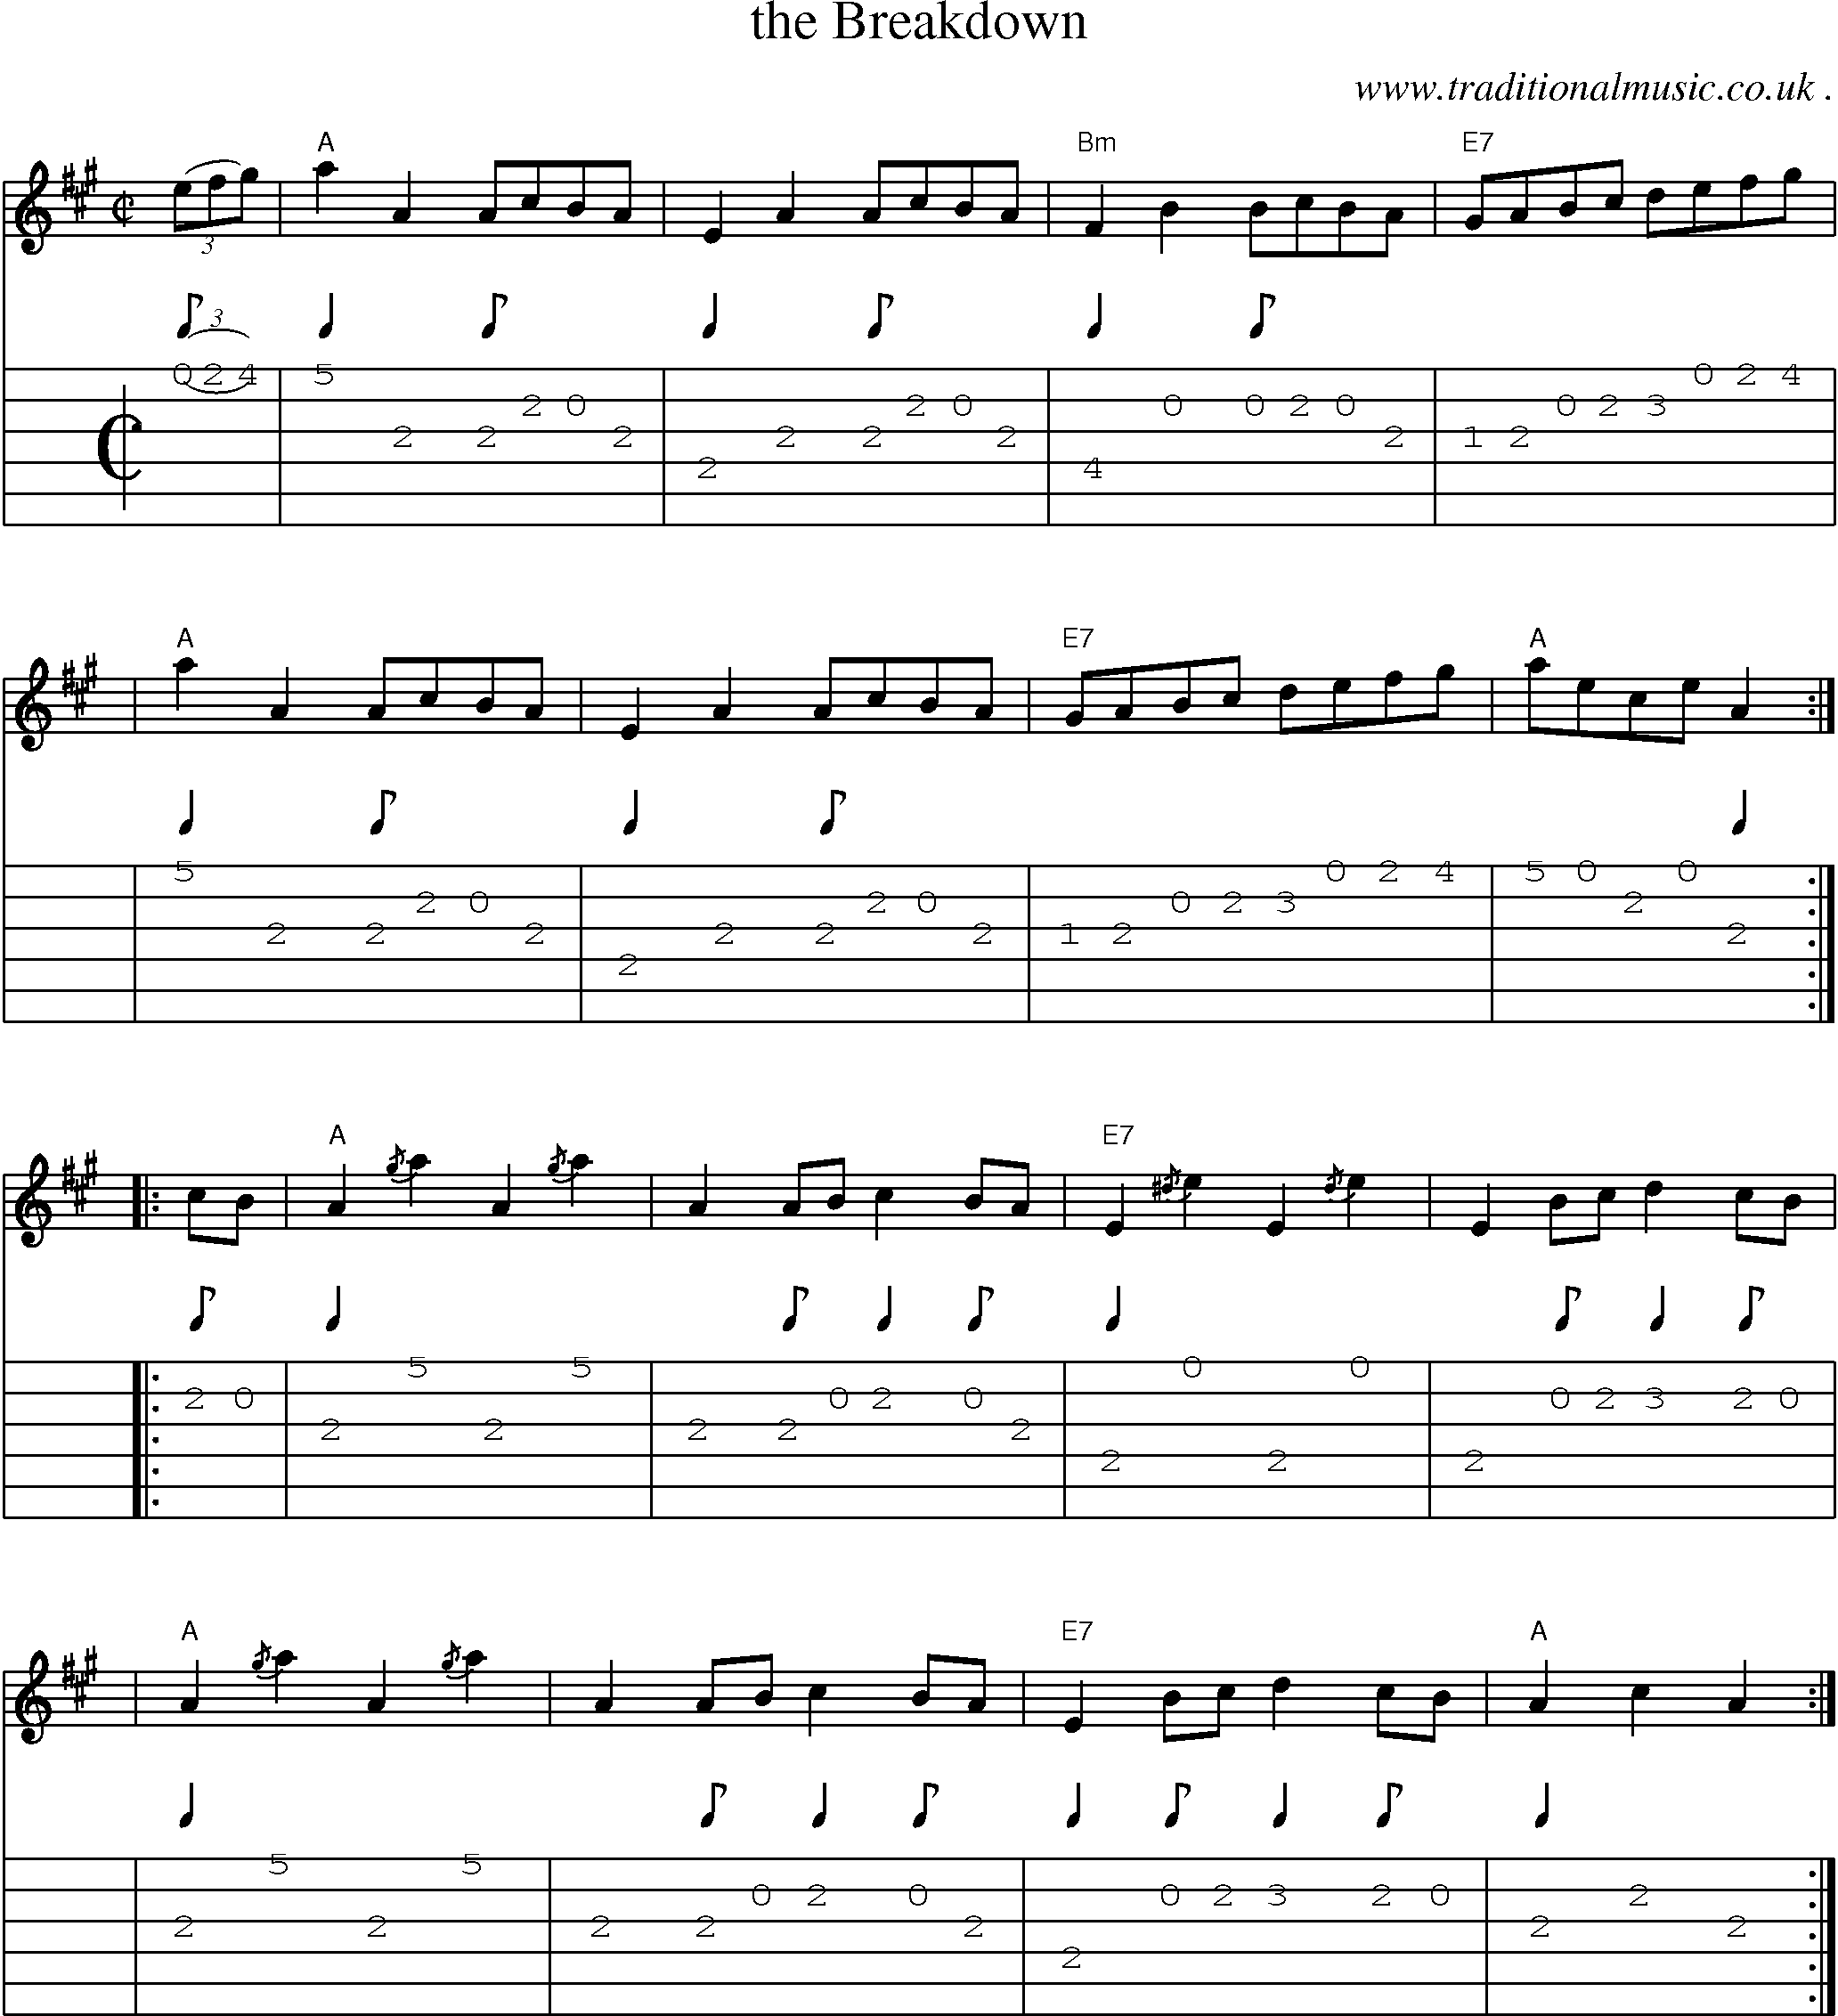 Sheet-music  score, Chords and Guitar Tabs for The Breakdown